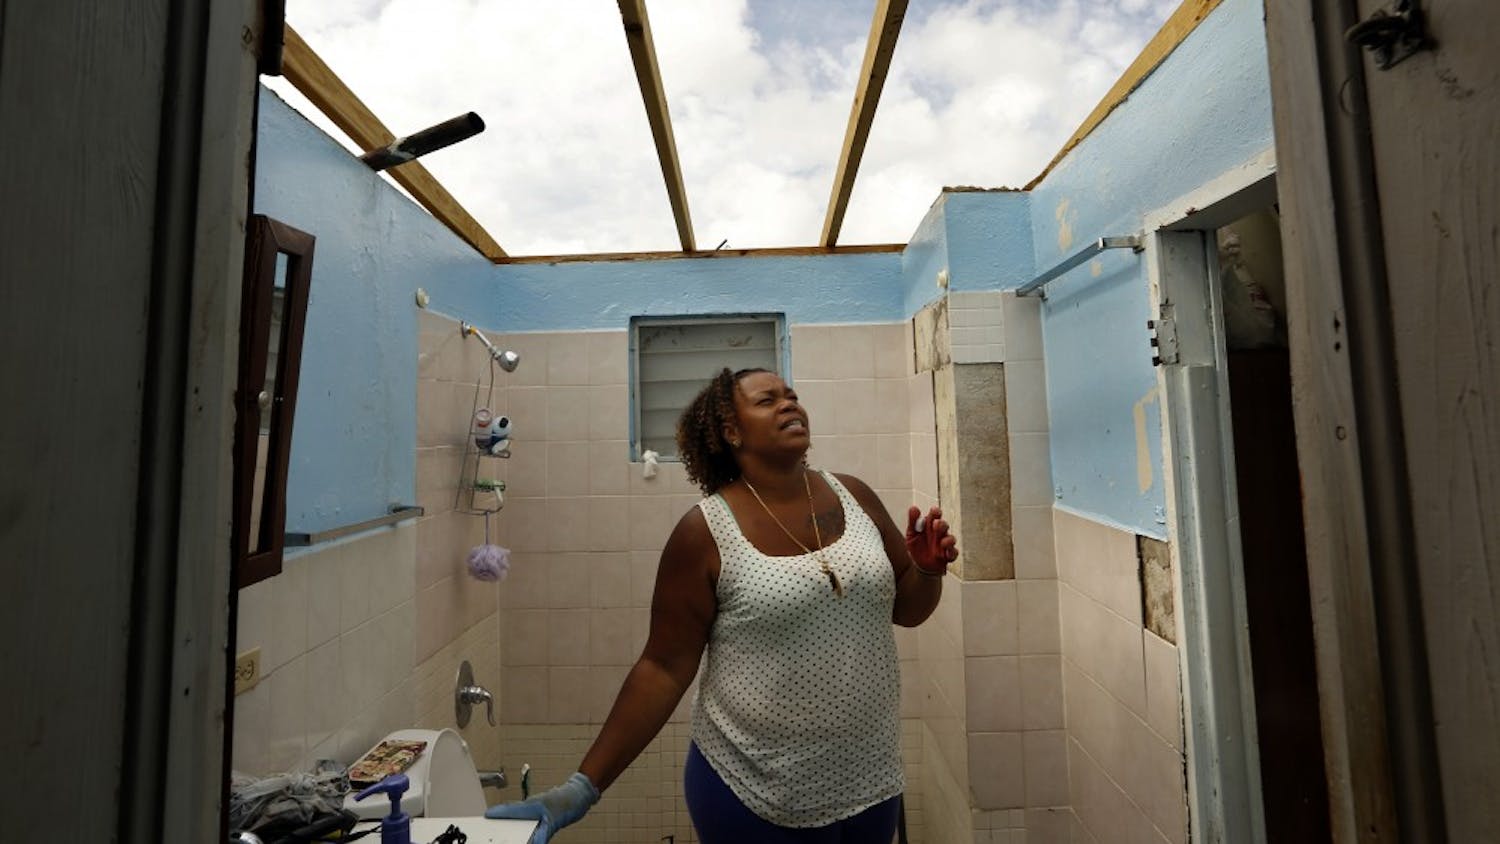 Adele Thomas is grateful that her family survived Hurricane Irma after it roared through her house, ripping the roof off and destorying all the contents. She is working to cover the roof with plastic, but the bathroom hasn't been covered yet, nor is there running water or electricity on Friday, Sept. 15, 2017. (Carolyn Cole/Los Angeles Times/TNS)